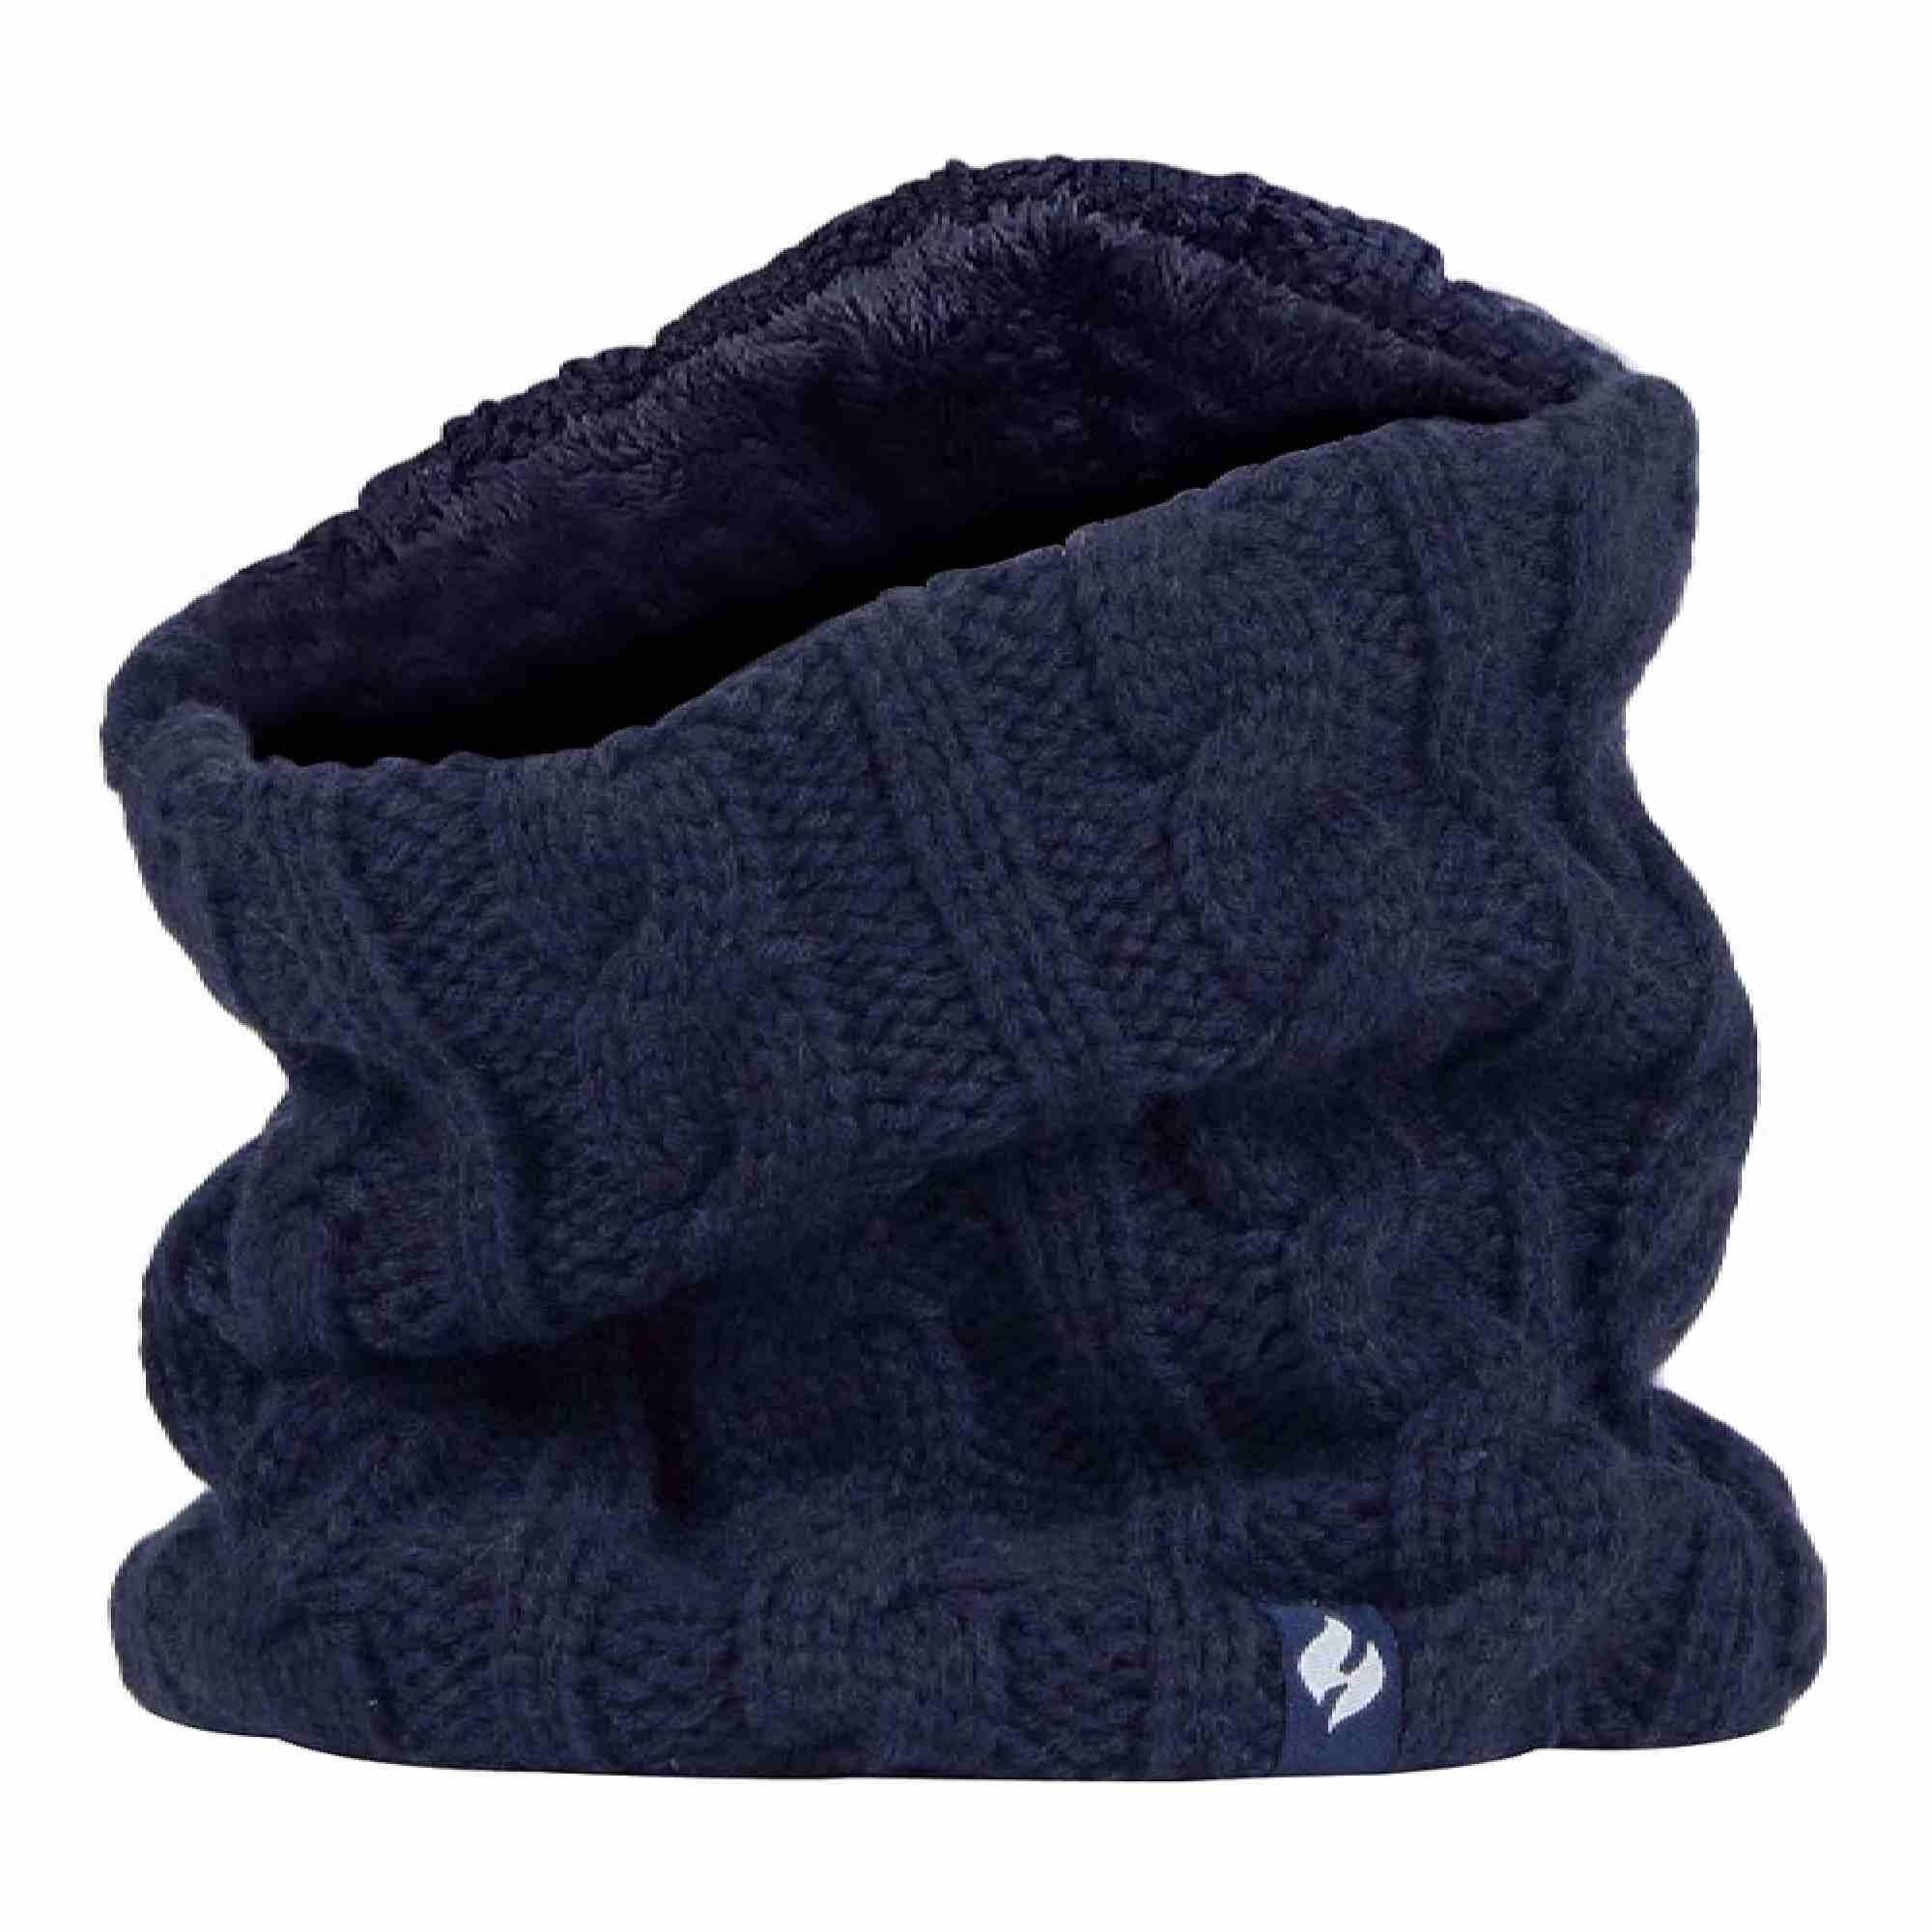 HEAT HOLDERS Ladies Thick Cable Knit Fleece Lined Thermal Neck Warmer